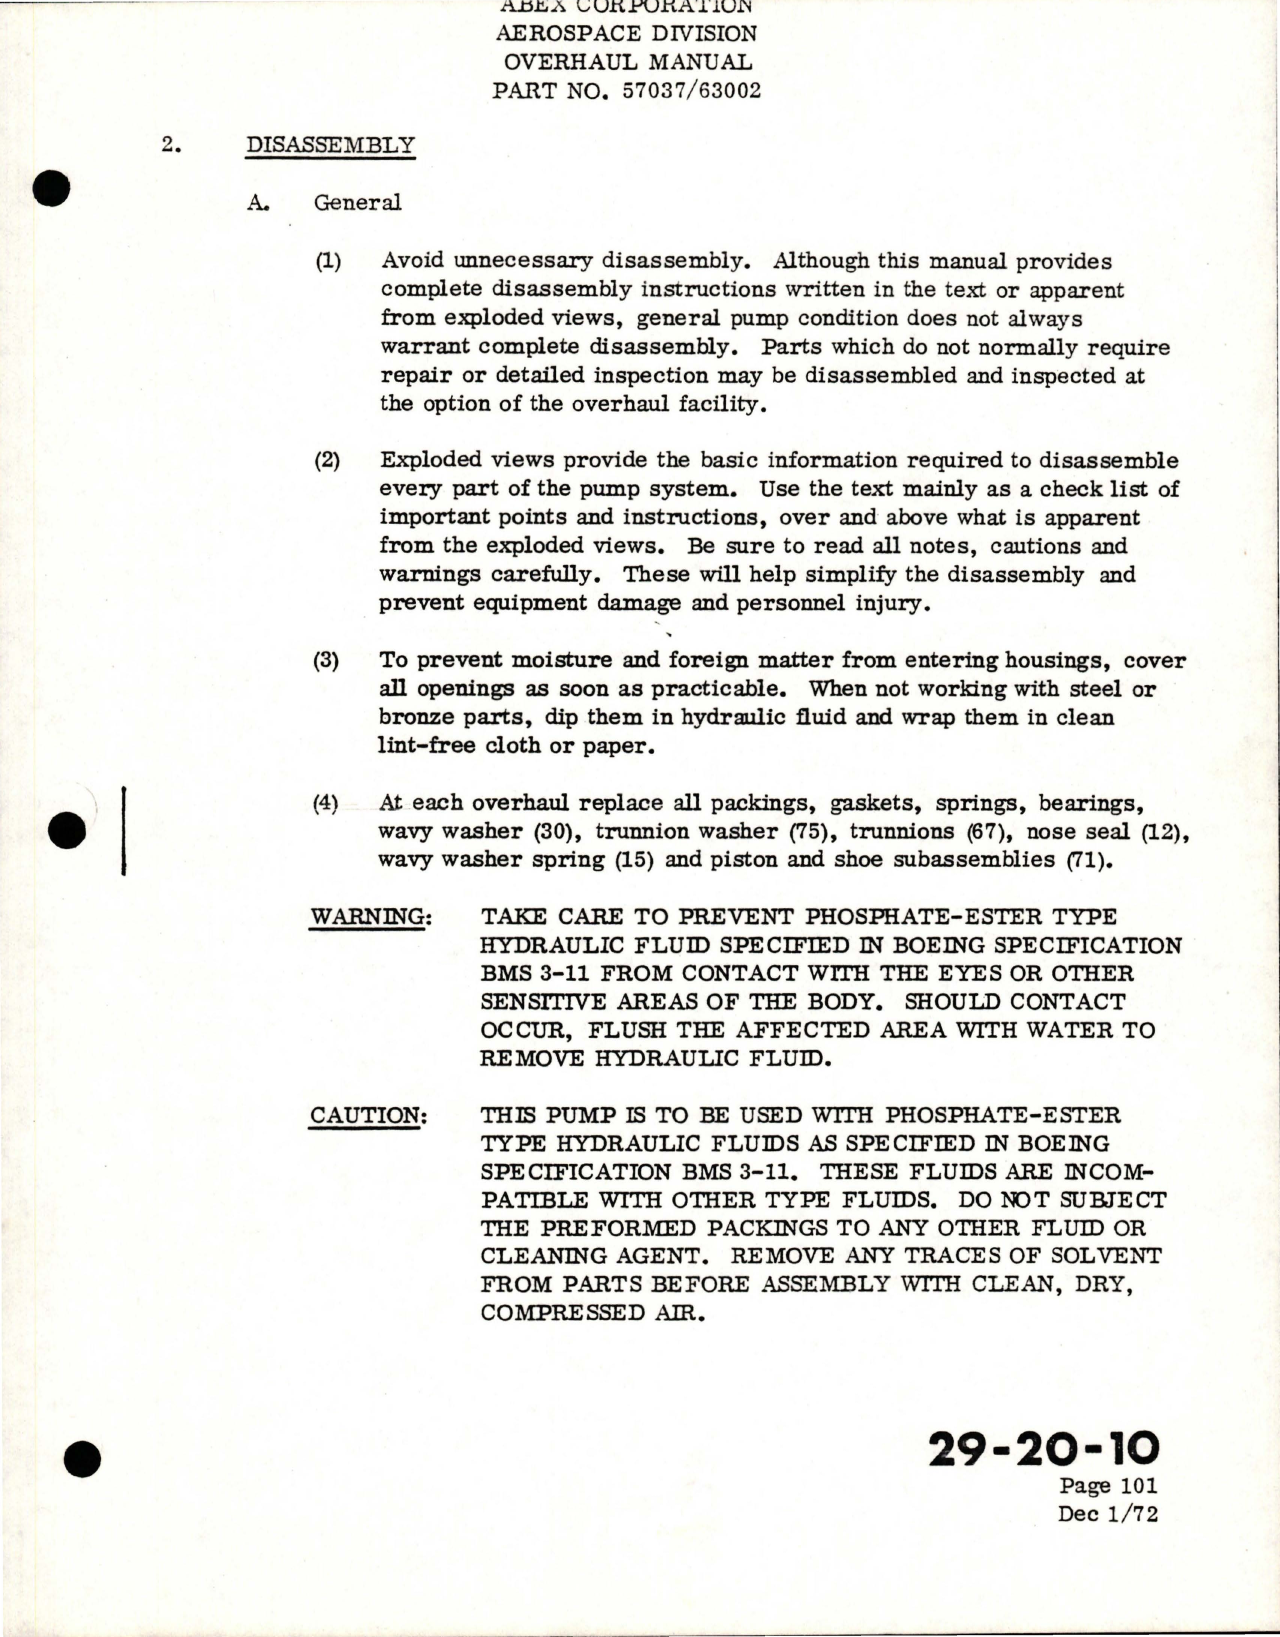 Sample page 9 from AirCorps Library document: Overhaul Manual for Pump and Motor Package - Parts 57037, 63002 - Models PMP05VC-5 and PMP05VC-5A 